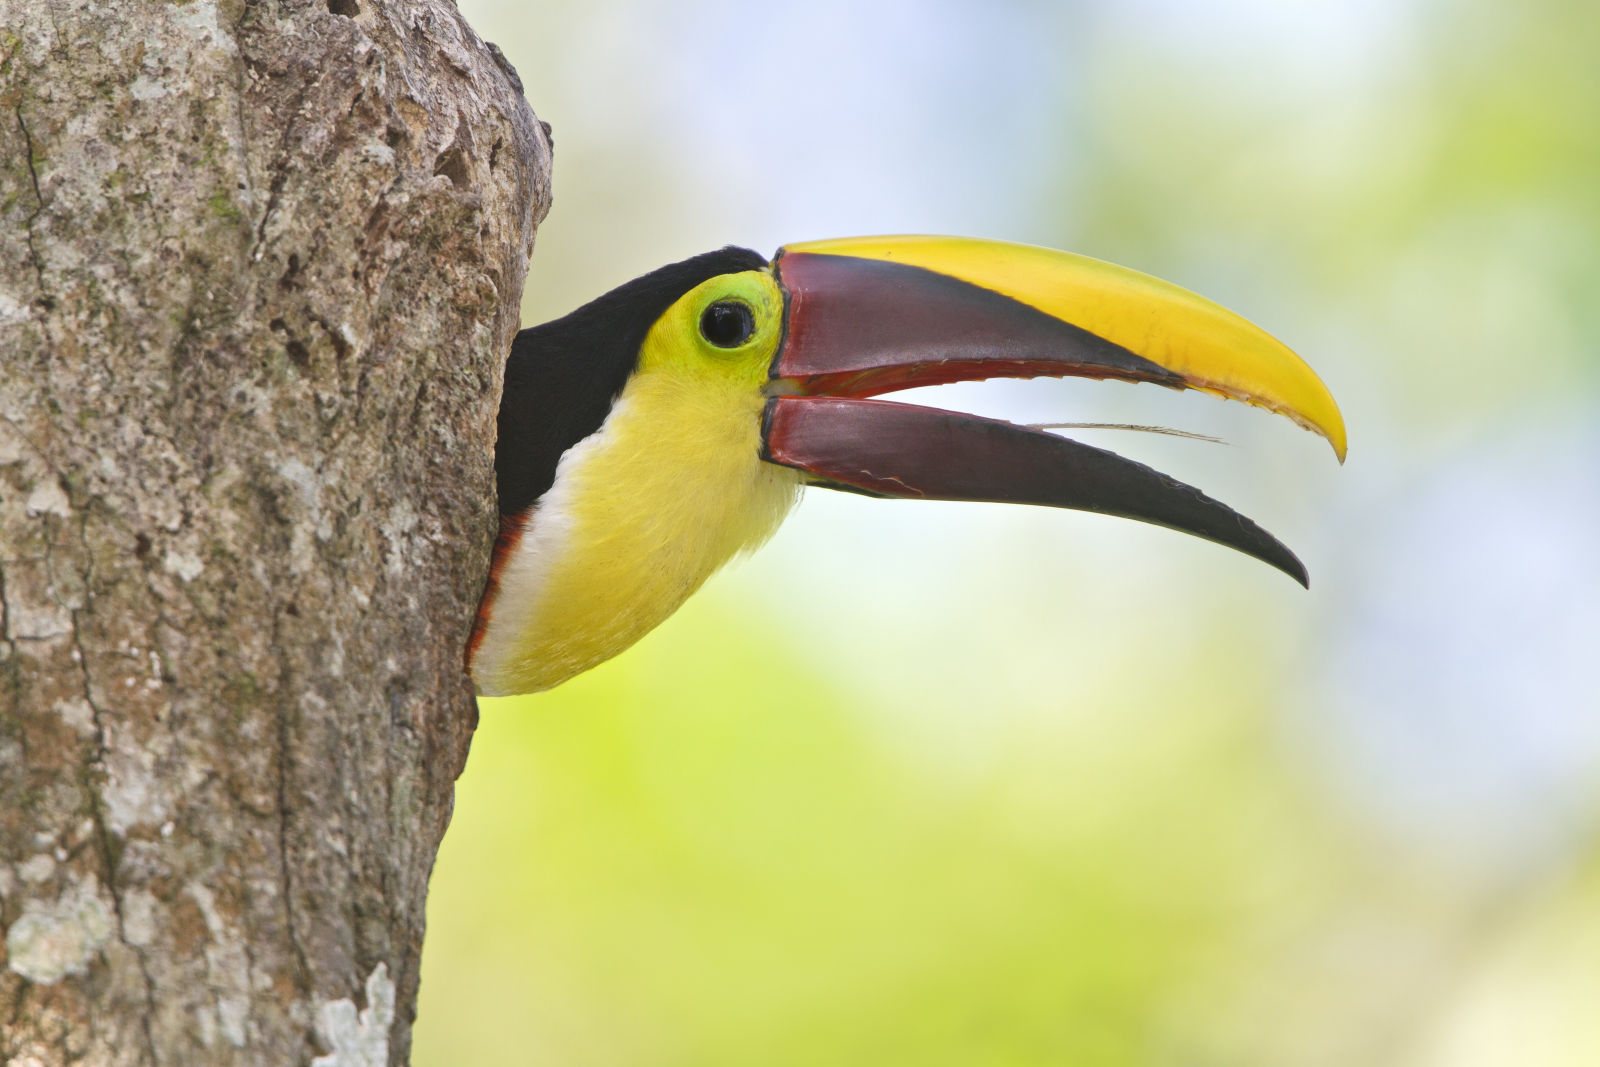 Chestnut-mandibled Toucan (Ramphastos swainsonii) pokes its head out of its nest hole in Costa Rica. Glenn Bartley
